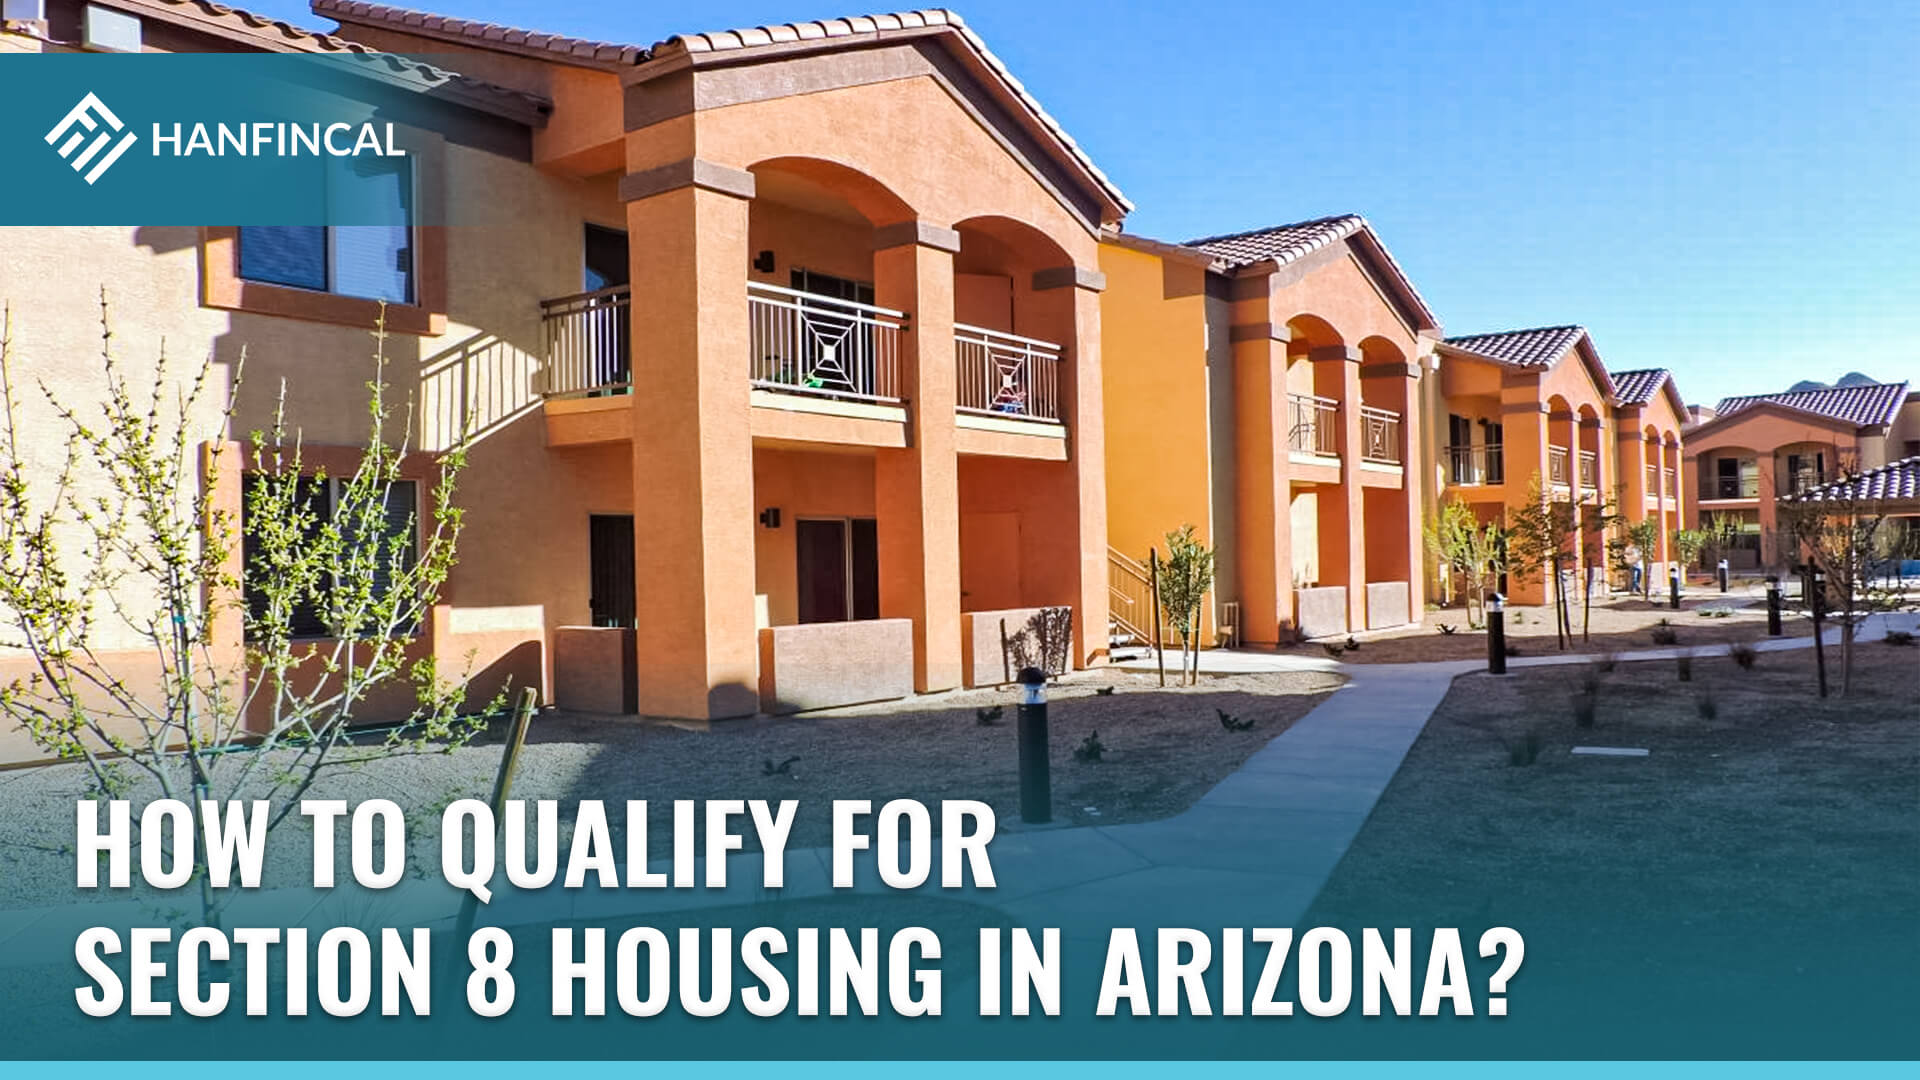 How to qualify for Section 8 Housing in Arizona (AZ)?